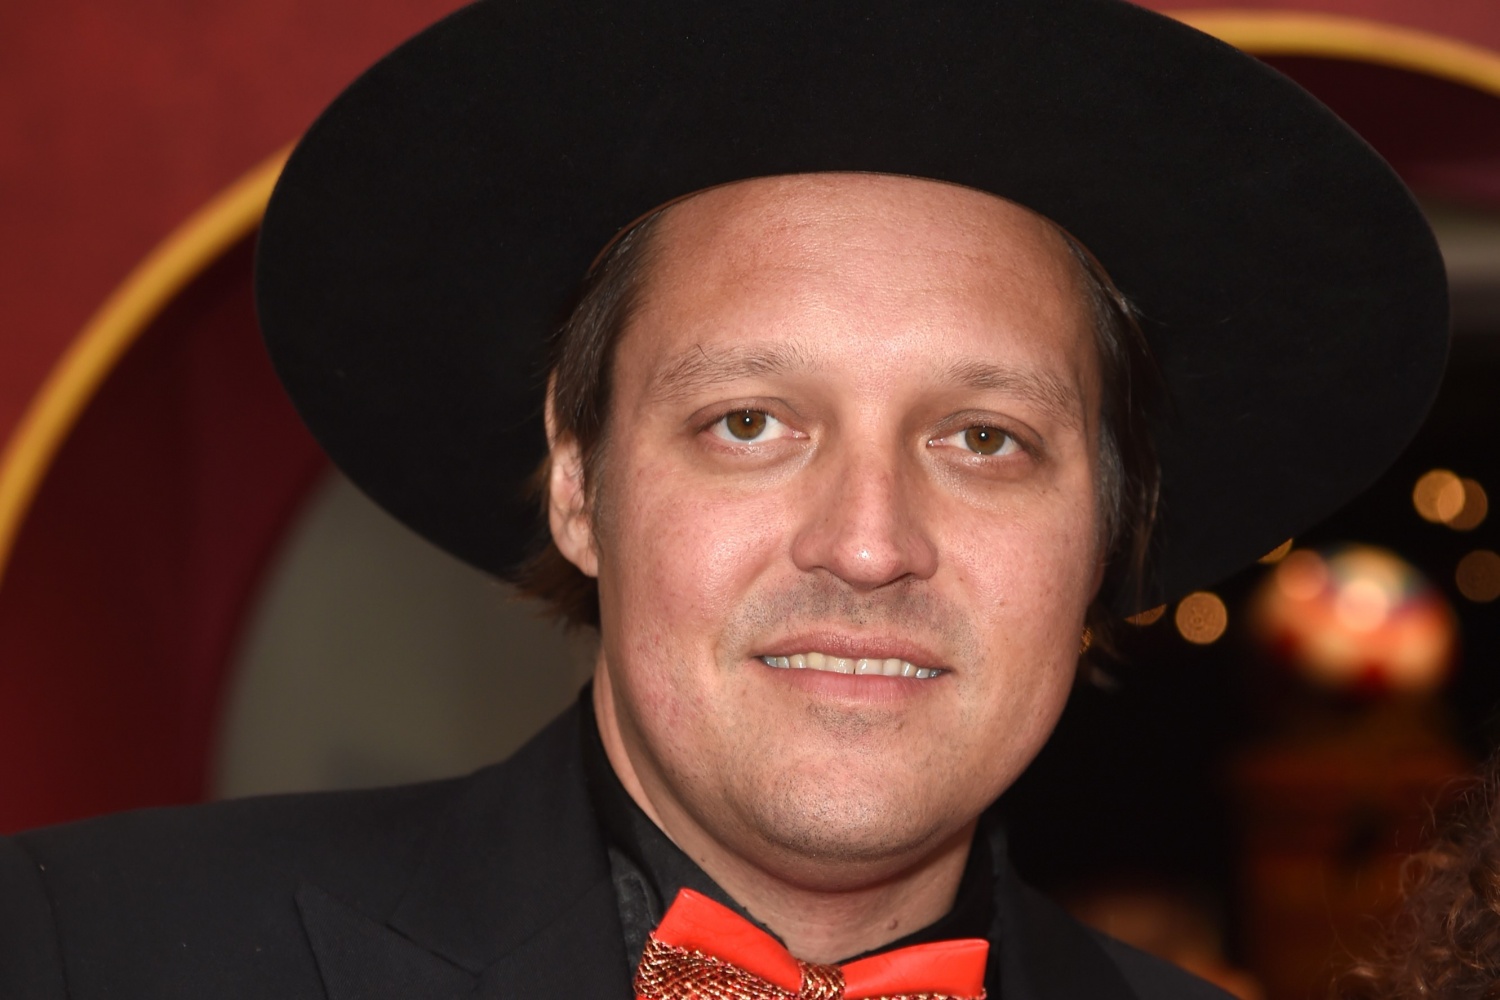 Arcade Fire Co-Founder, Win Butler, Bombarded With New Shocking Abuse Allegation [DETAILS]